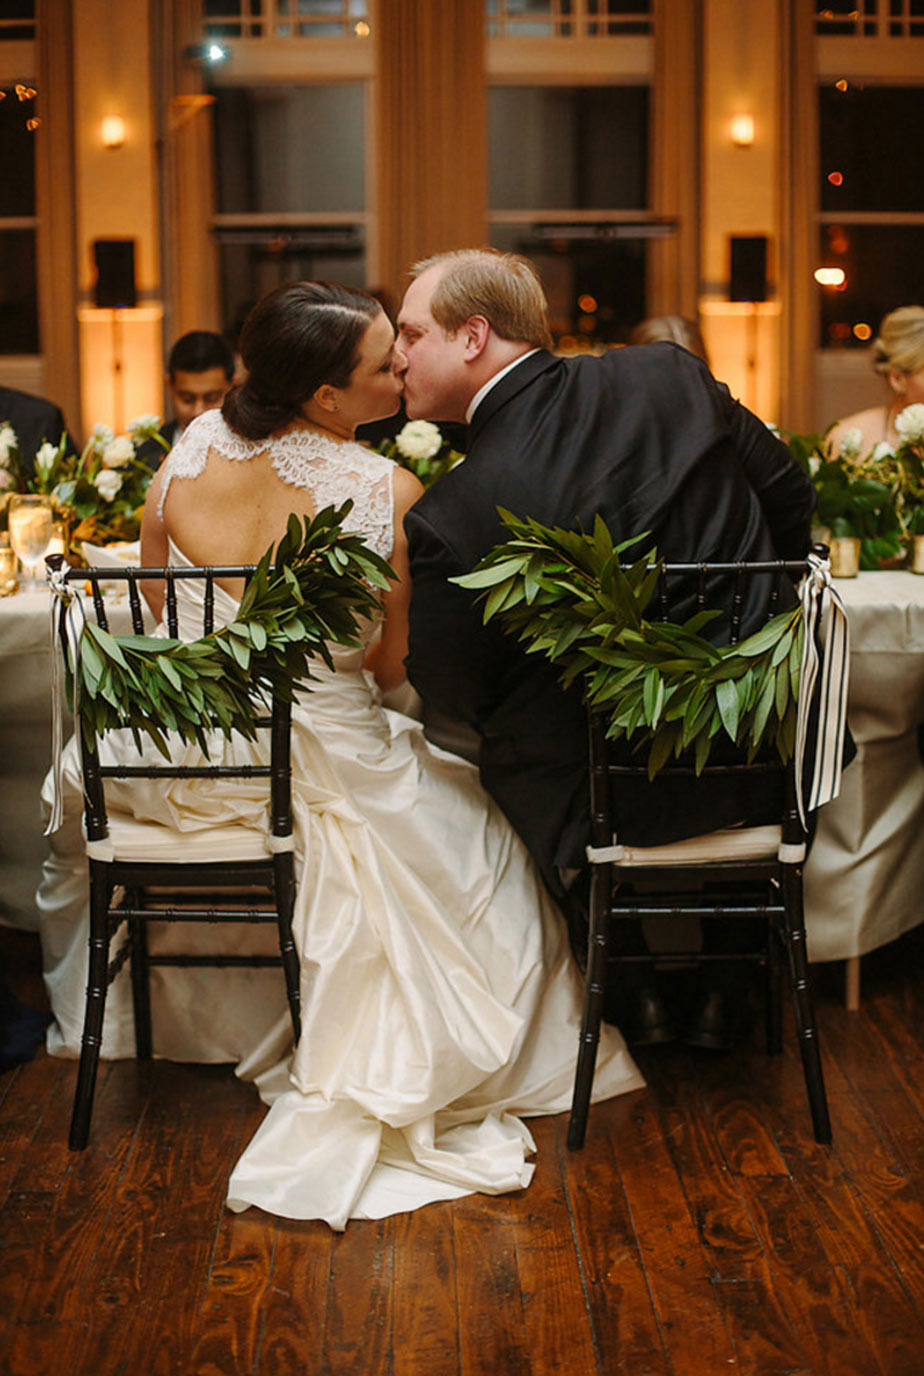 Bride and groom kissing at floral chair with swags of greenery and ribbon